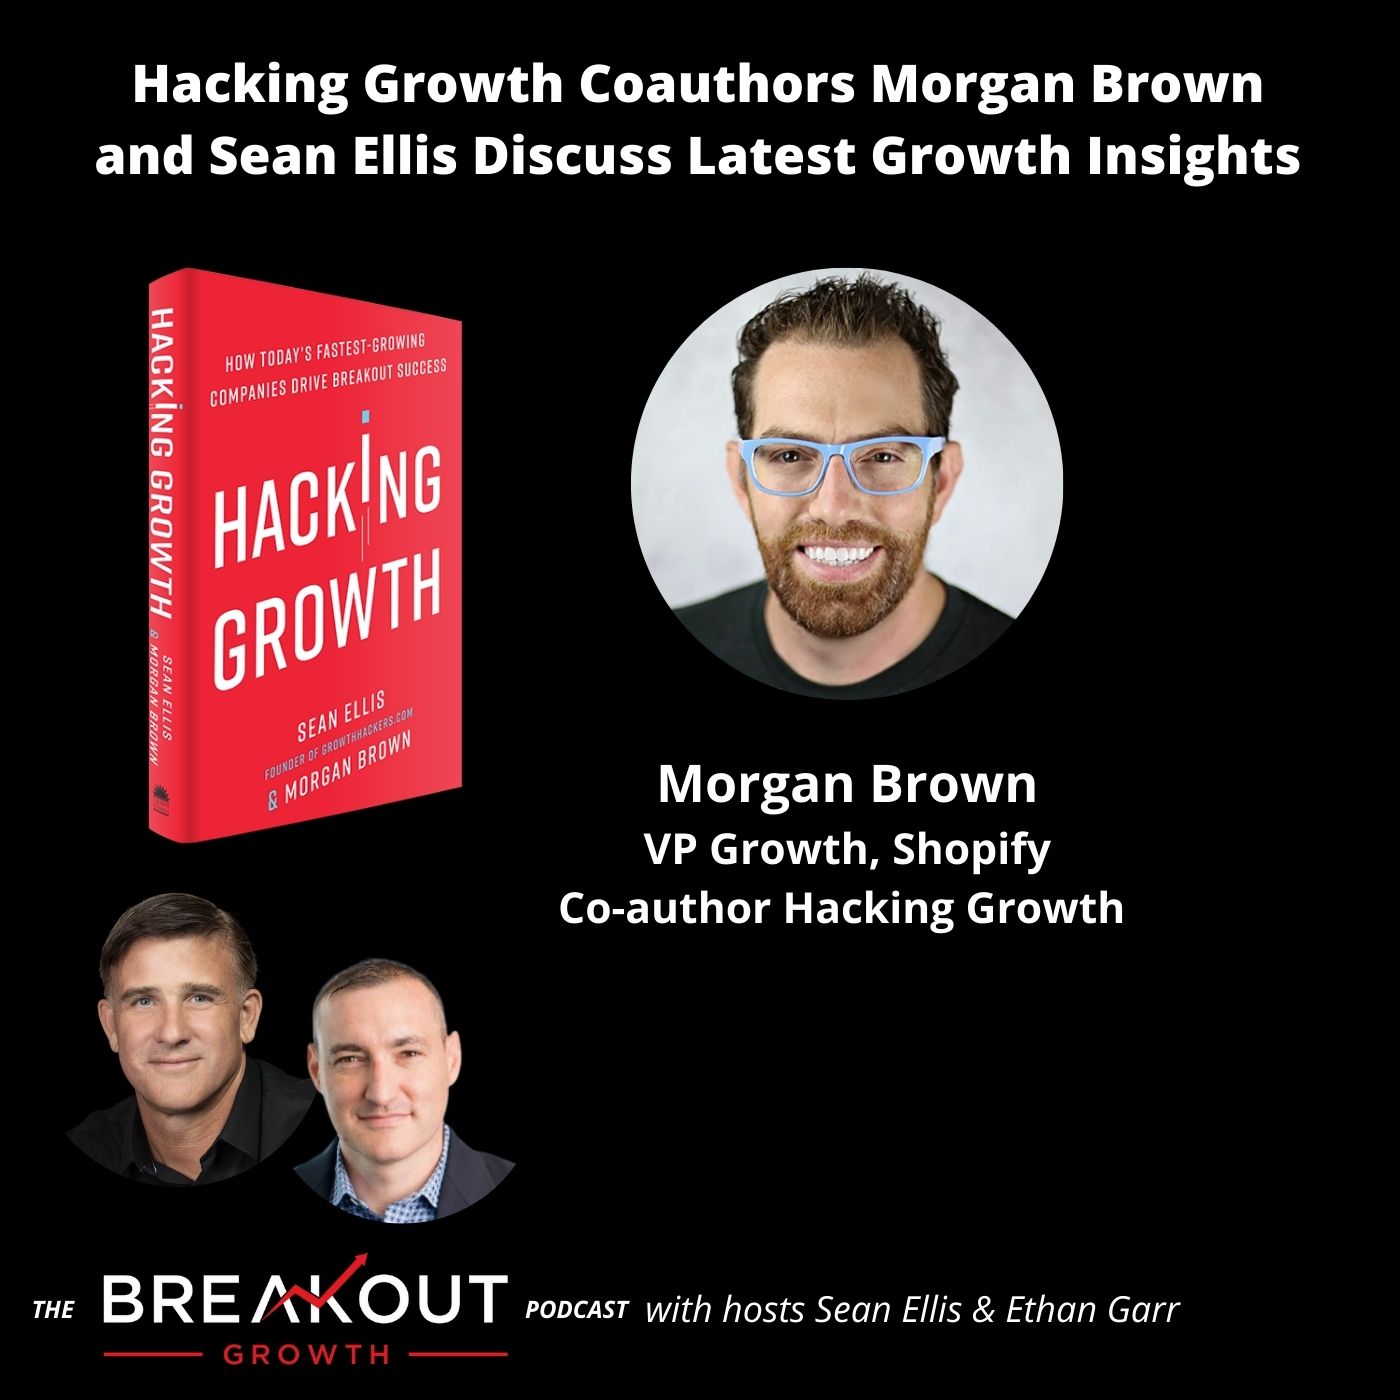 Hacking Growth Coauthors Morgan Brown and Sean Ellis Discuss Latest Growth Insights